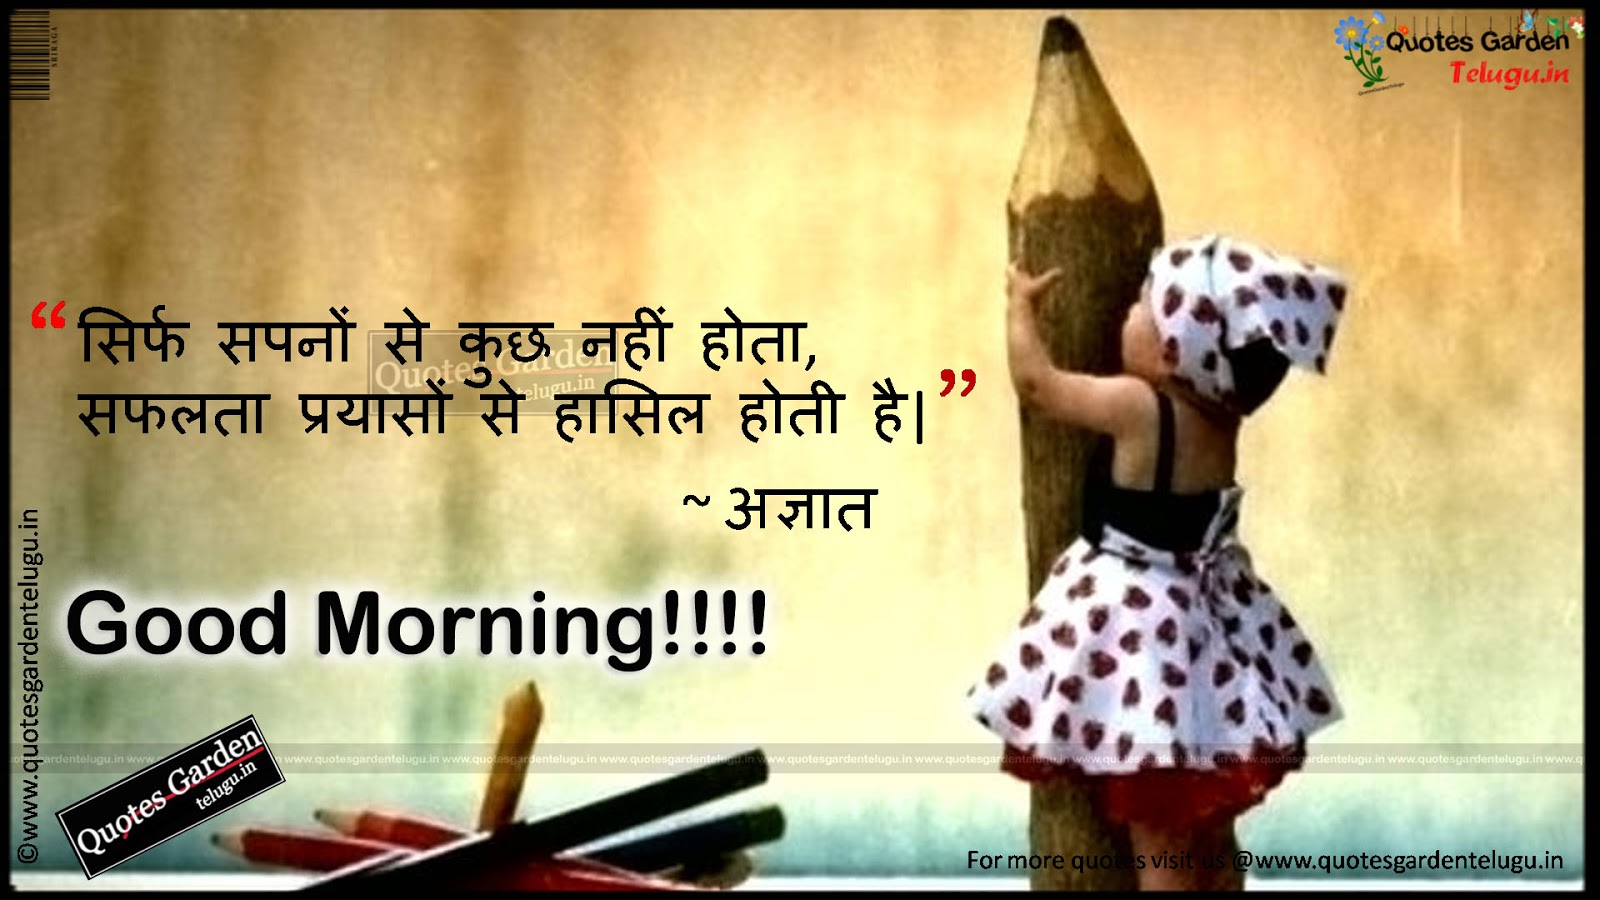 Inspirational Good morning messages in hindi 1336 | QUOTES GARDEN ...